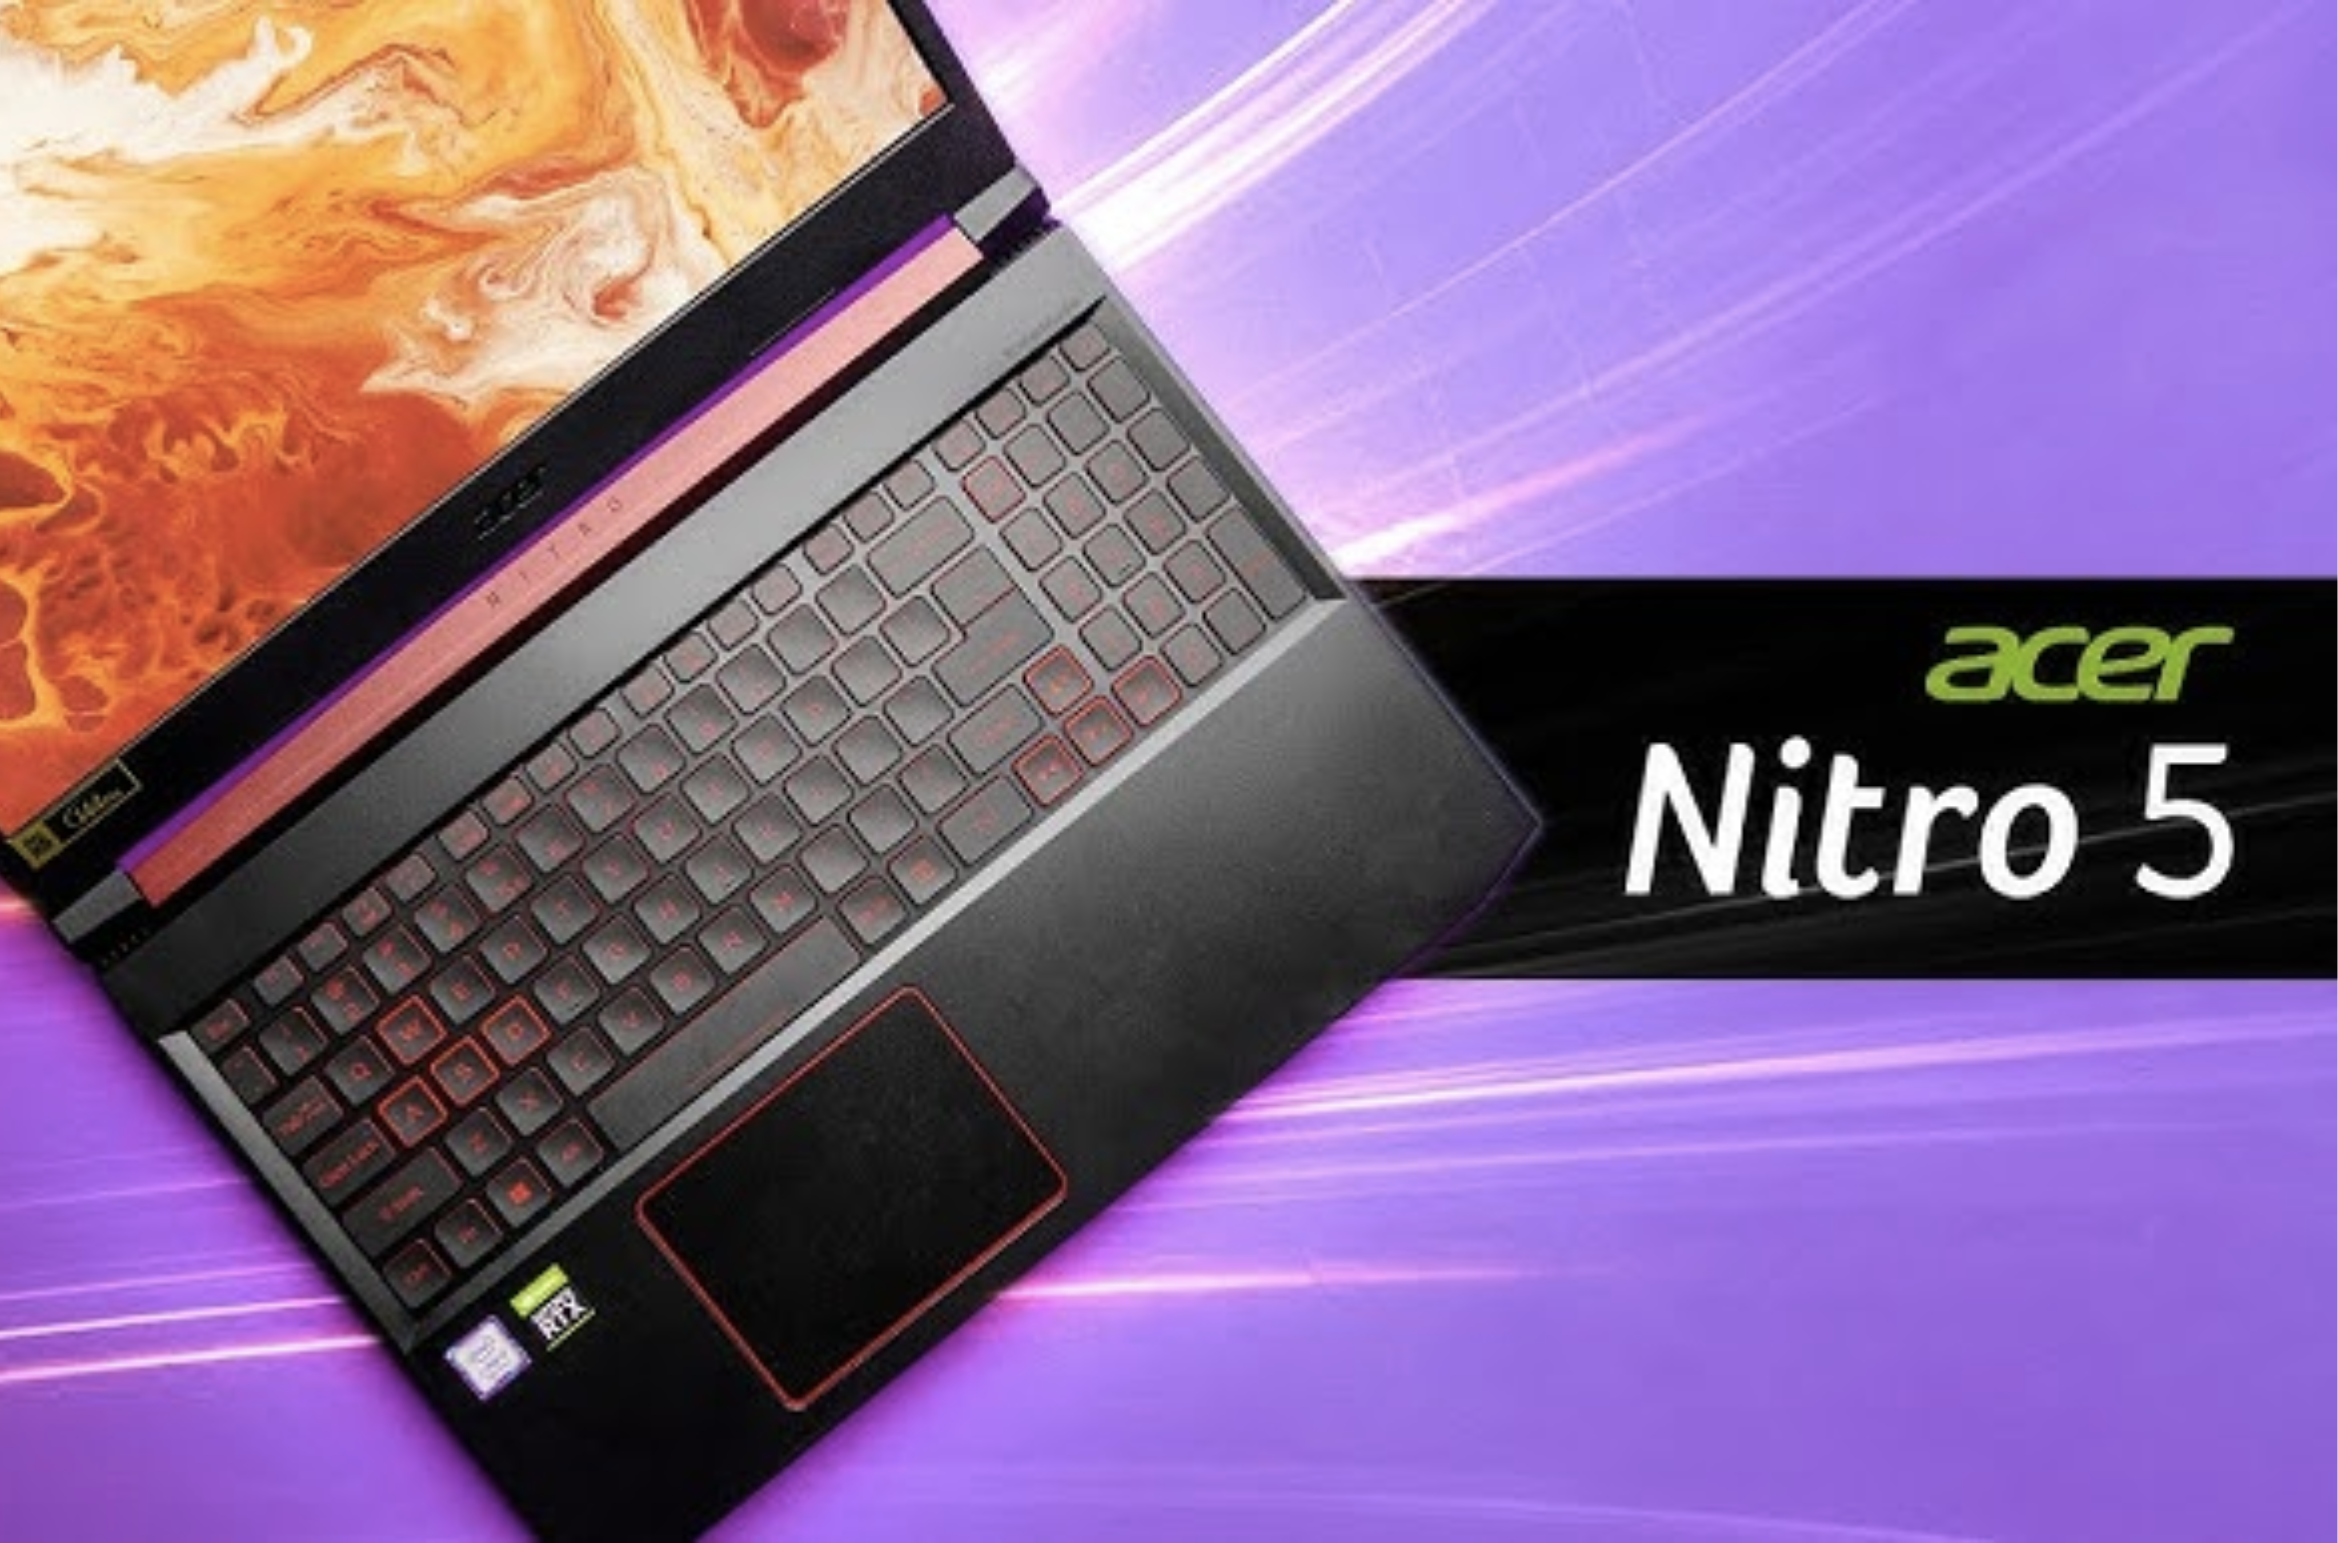 A black Acer Nitro 5 gaming laptop with a red backlit keyboard and touchpad, on a purple background.